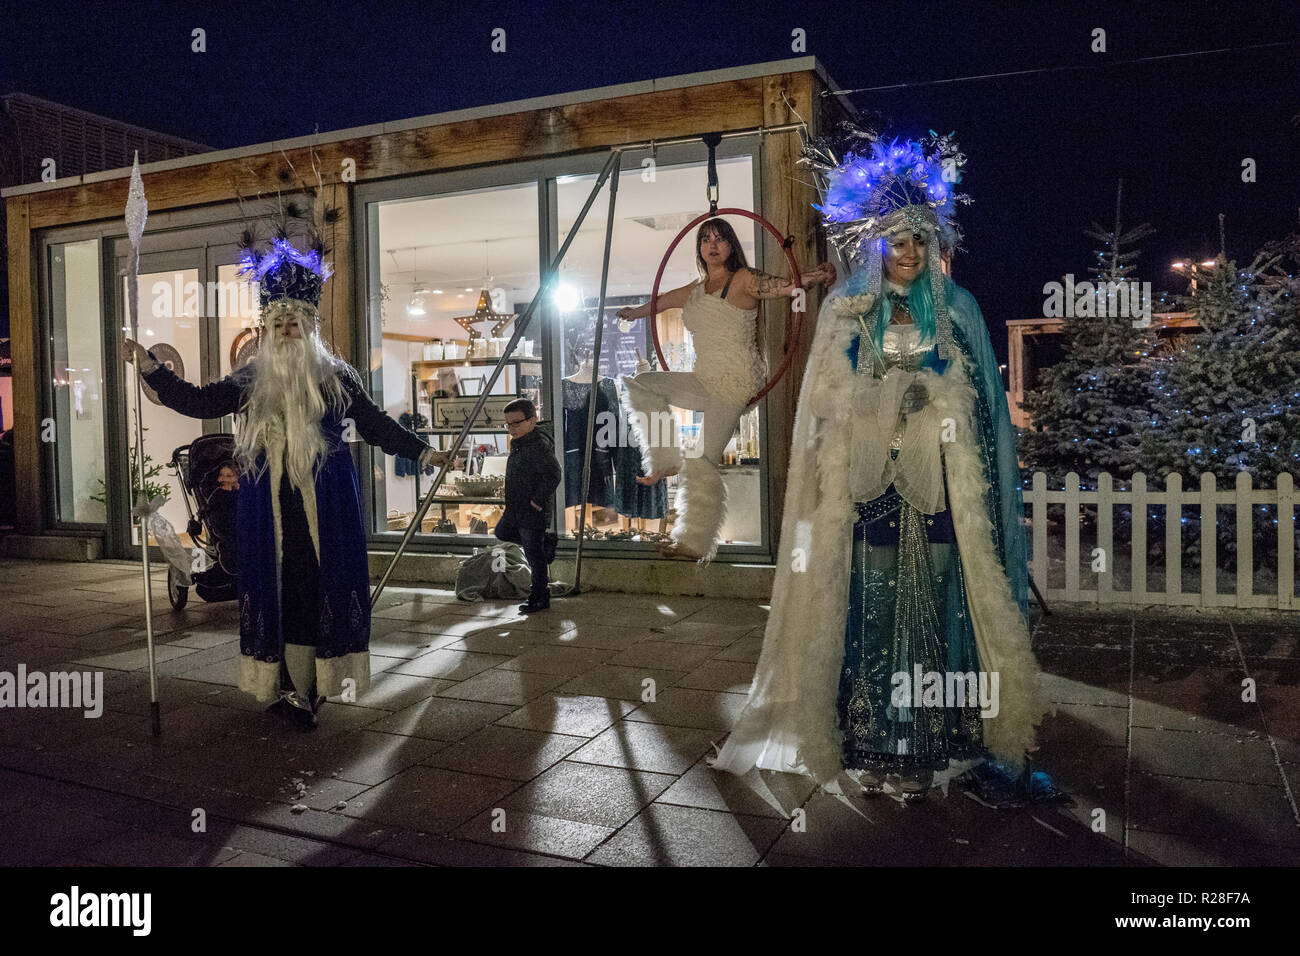 Hereford Uk 17th Nov 2018 The Ice Queen And Ice King Are Seen